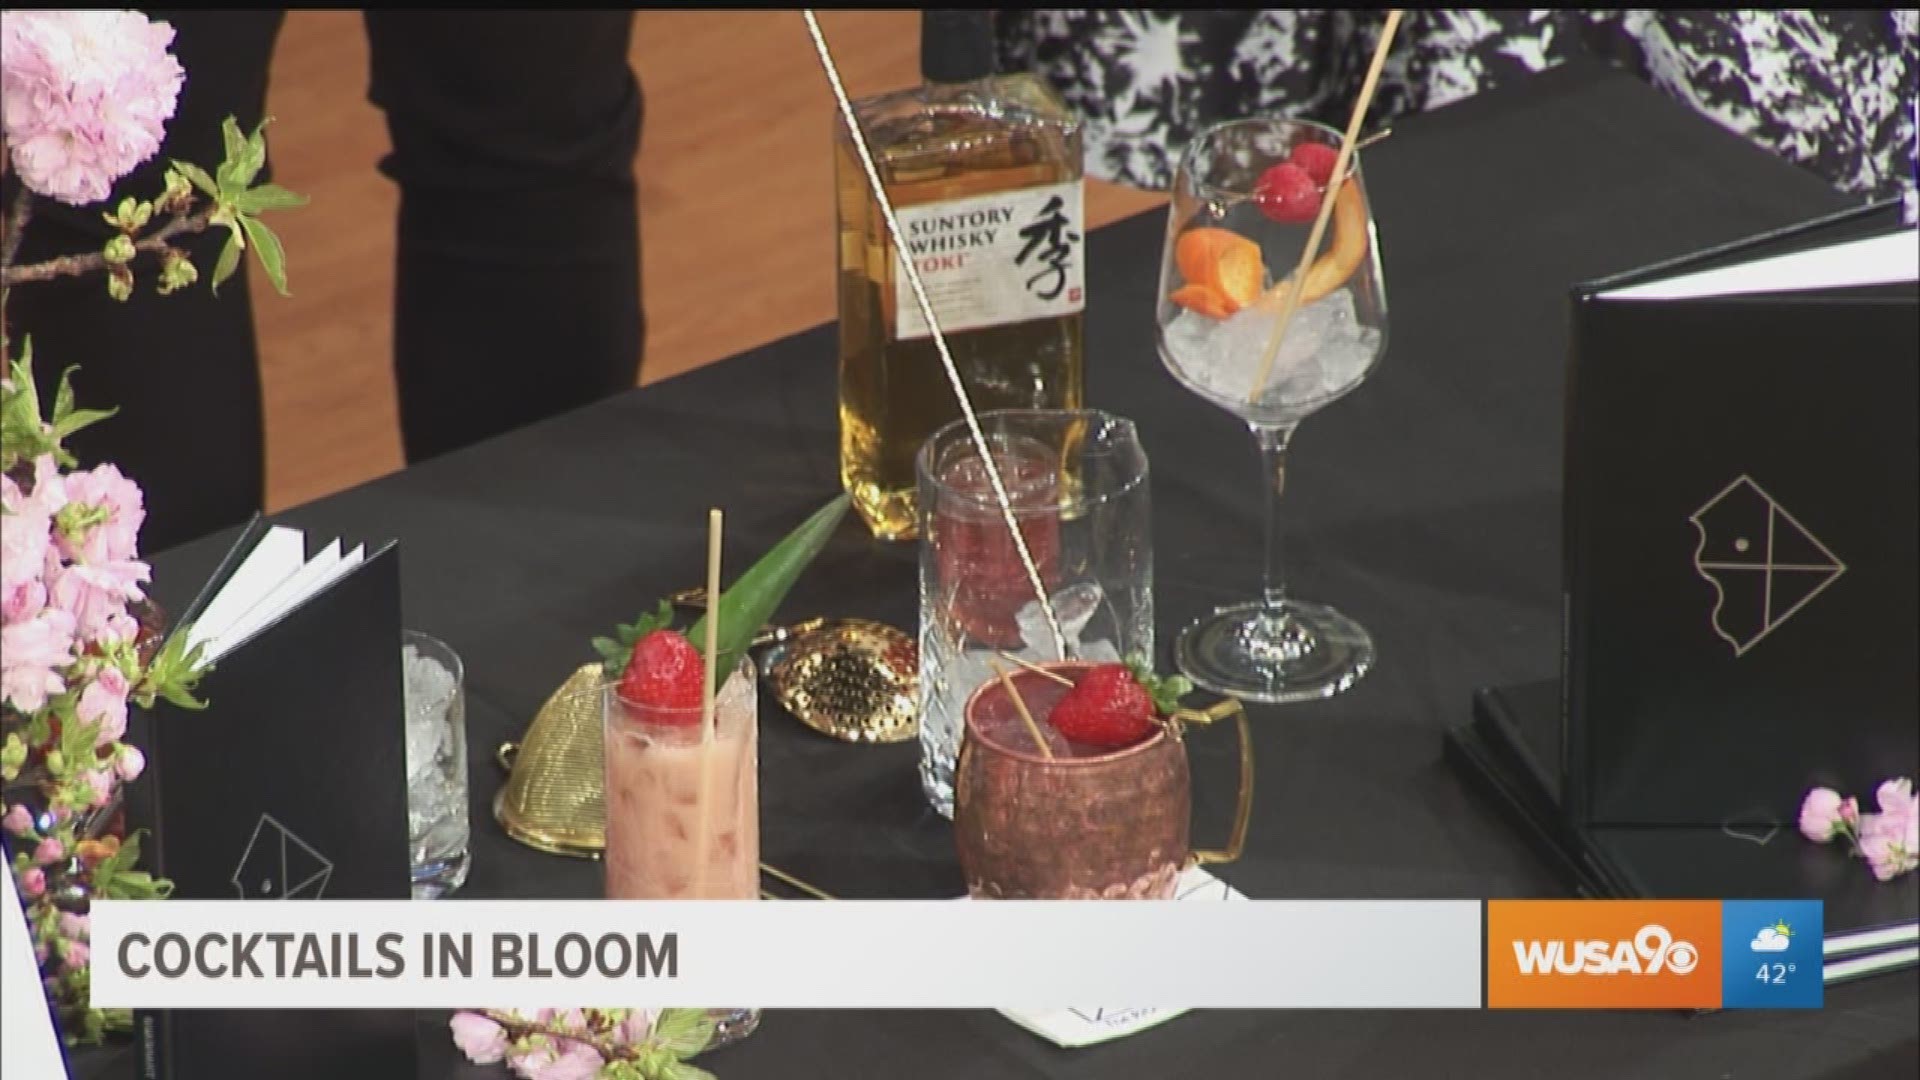 Nothing says spring like the smell of fresh flowers but at the Quadrant Bar & Lounge you can taste them! Located at the Ritz Carlton Washington DC, lead mixologist Chris Mendenhall shows us how to make his cherry blossom inspired cocktails.